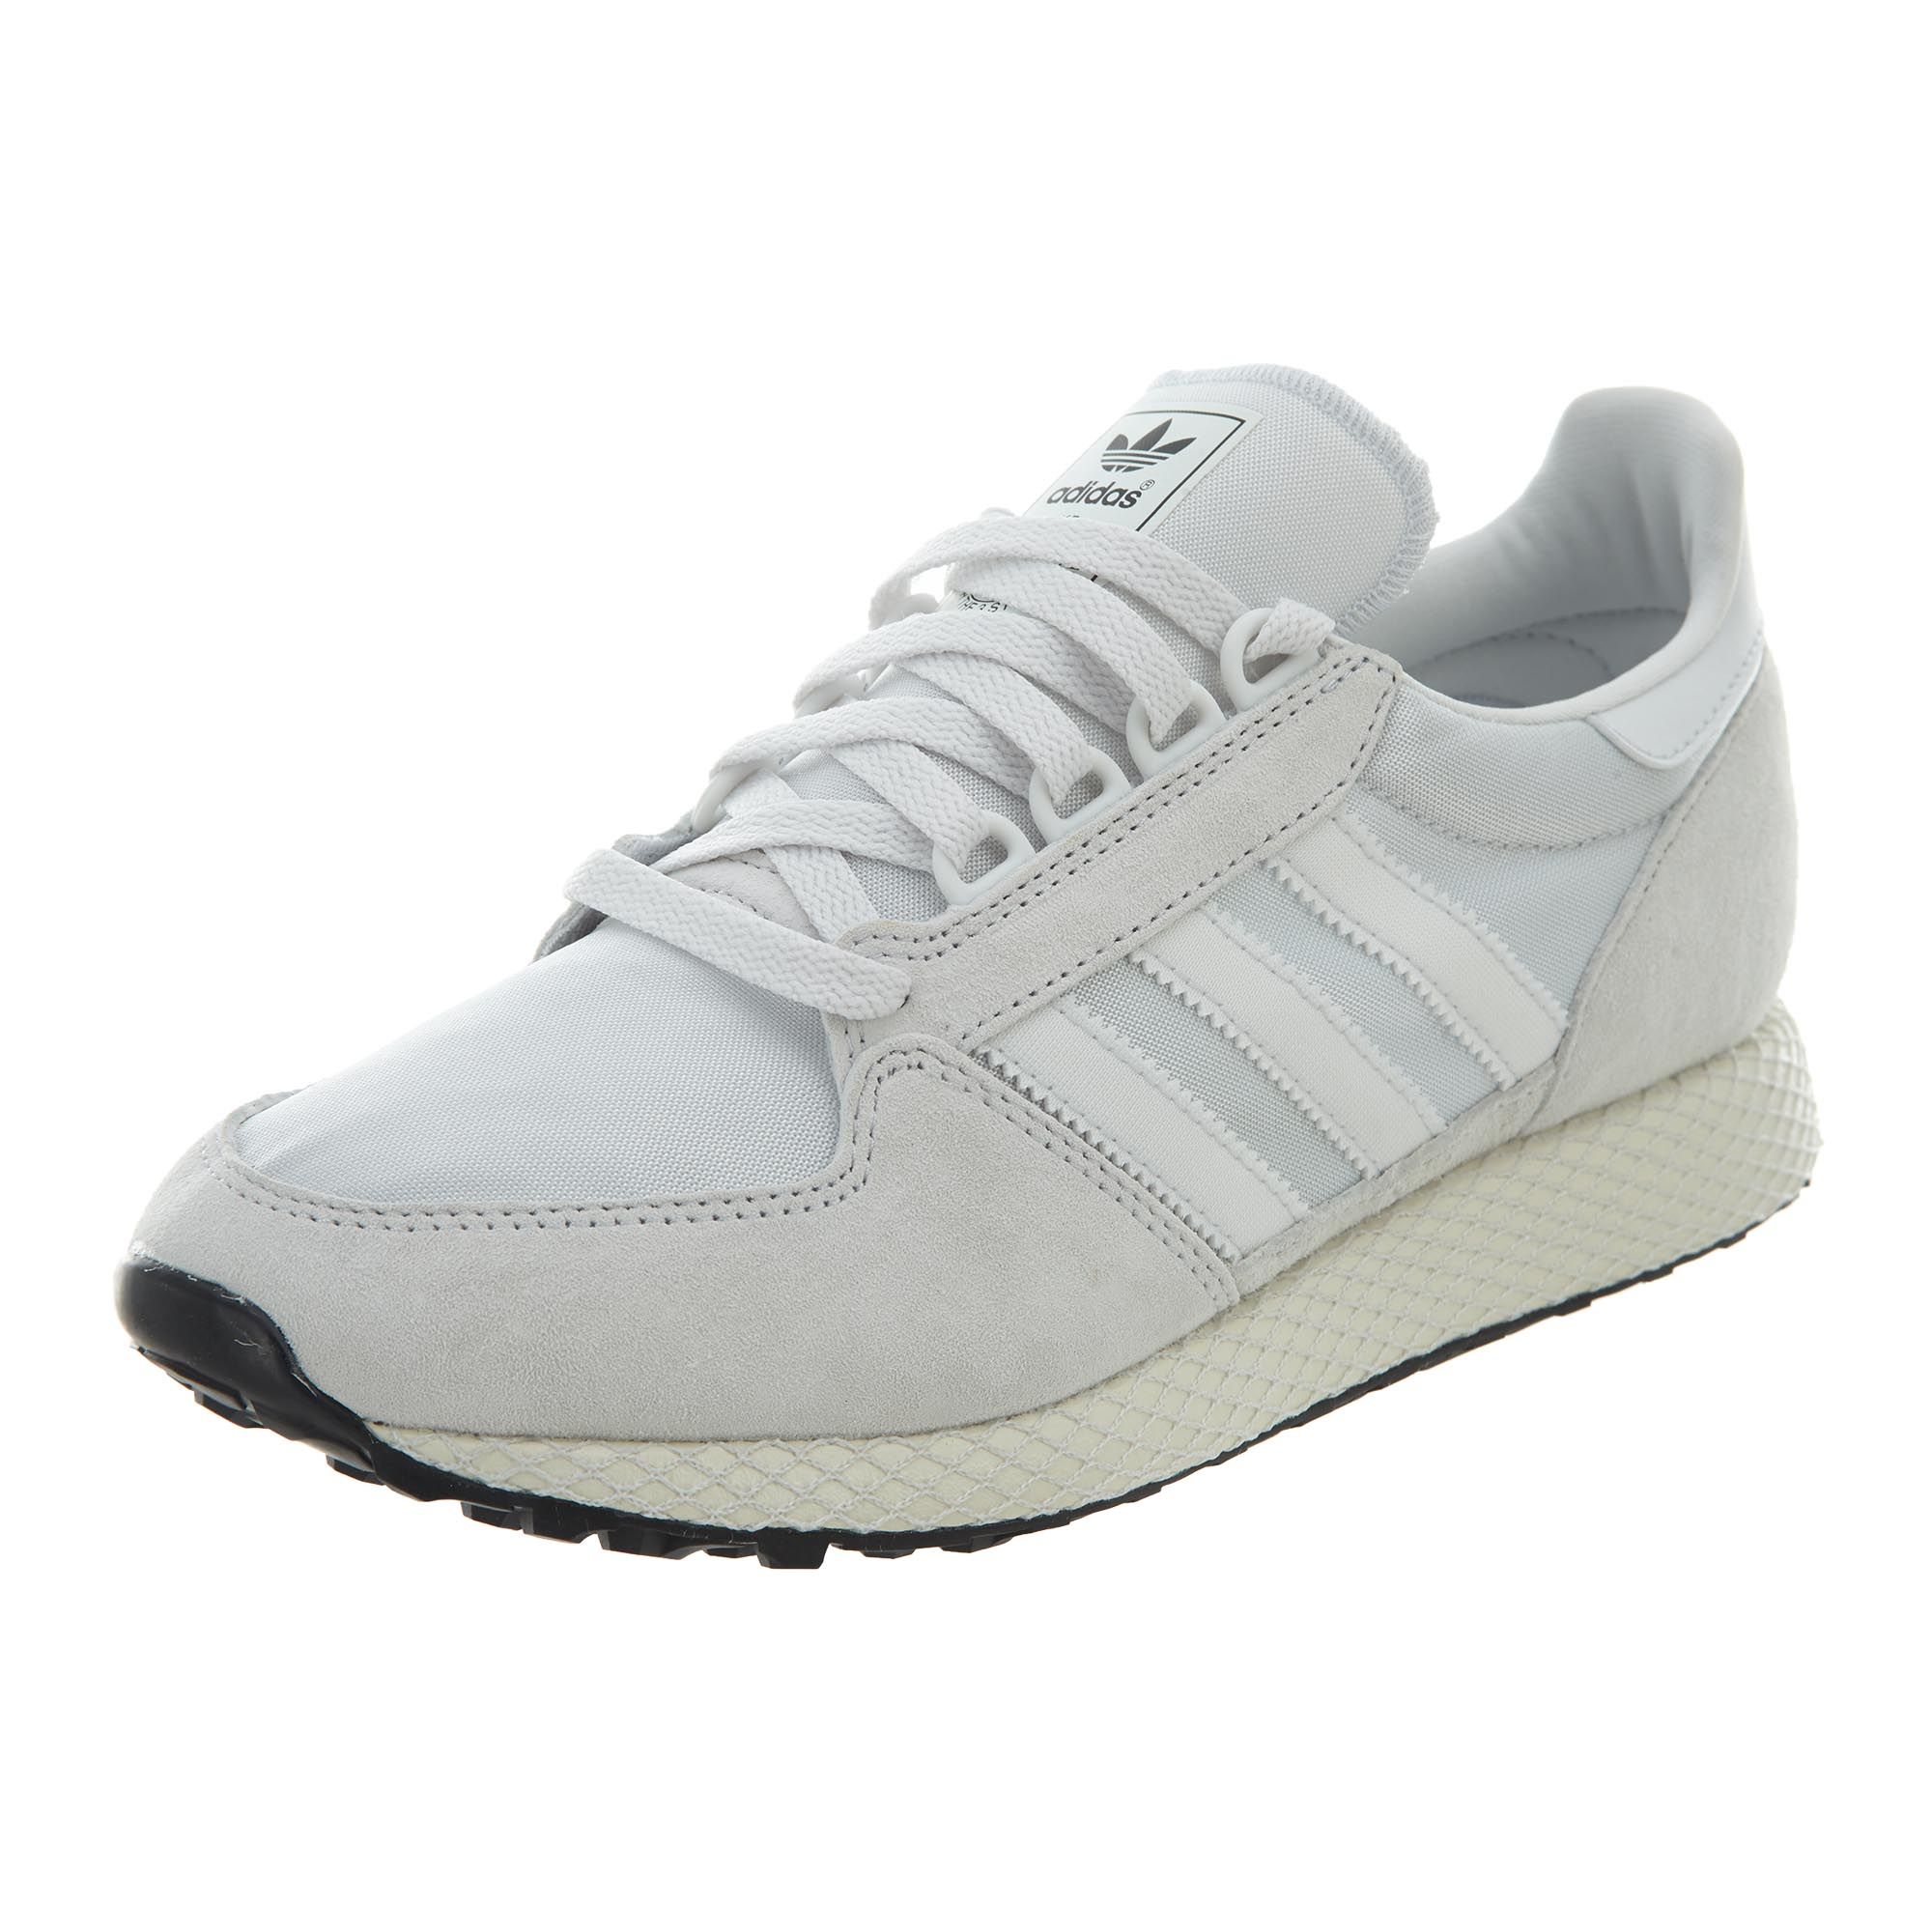 Adidas Forest Grove Mens Style : Aq1186 